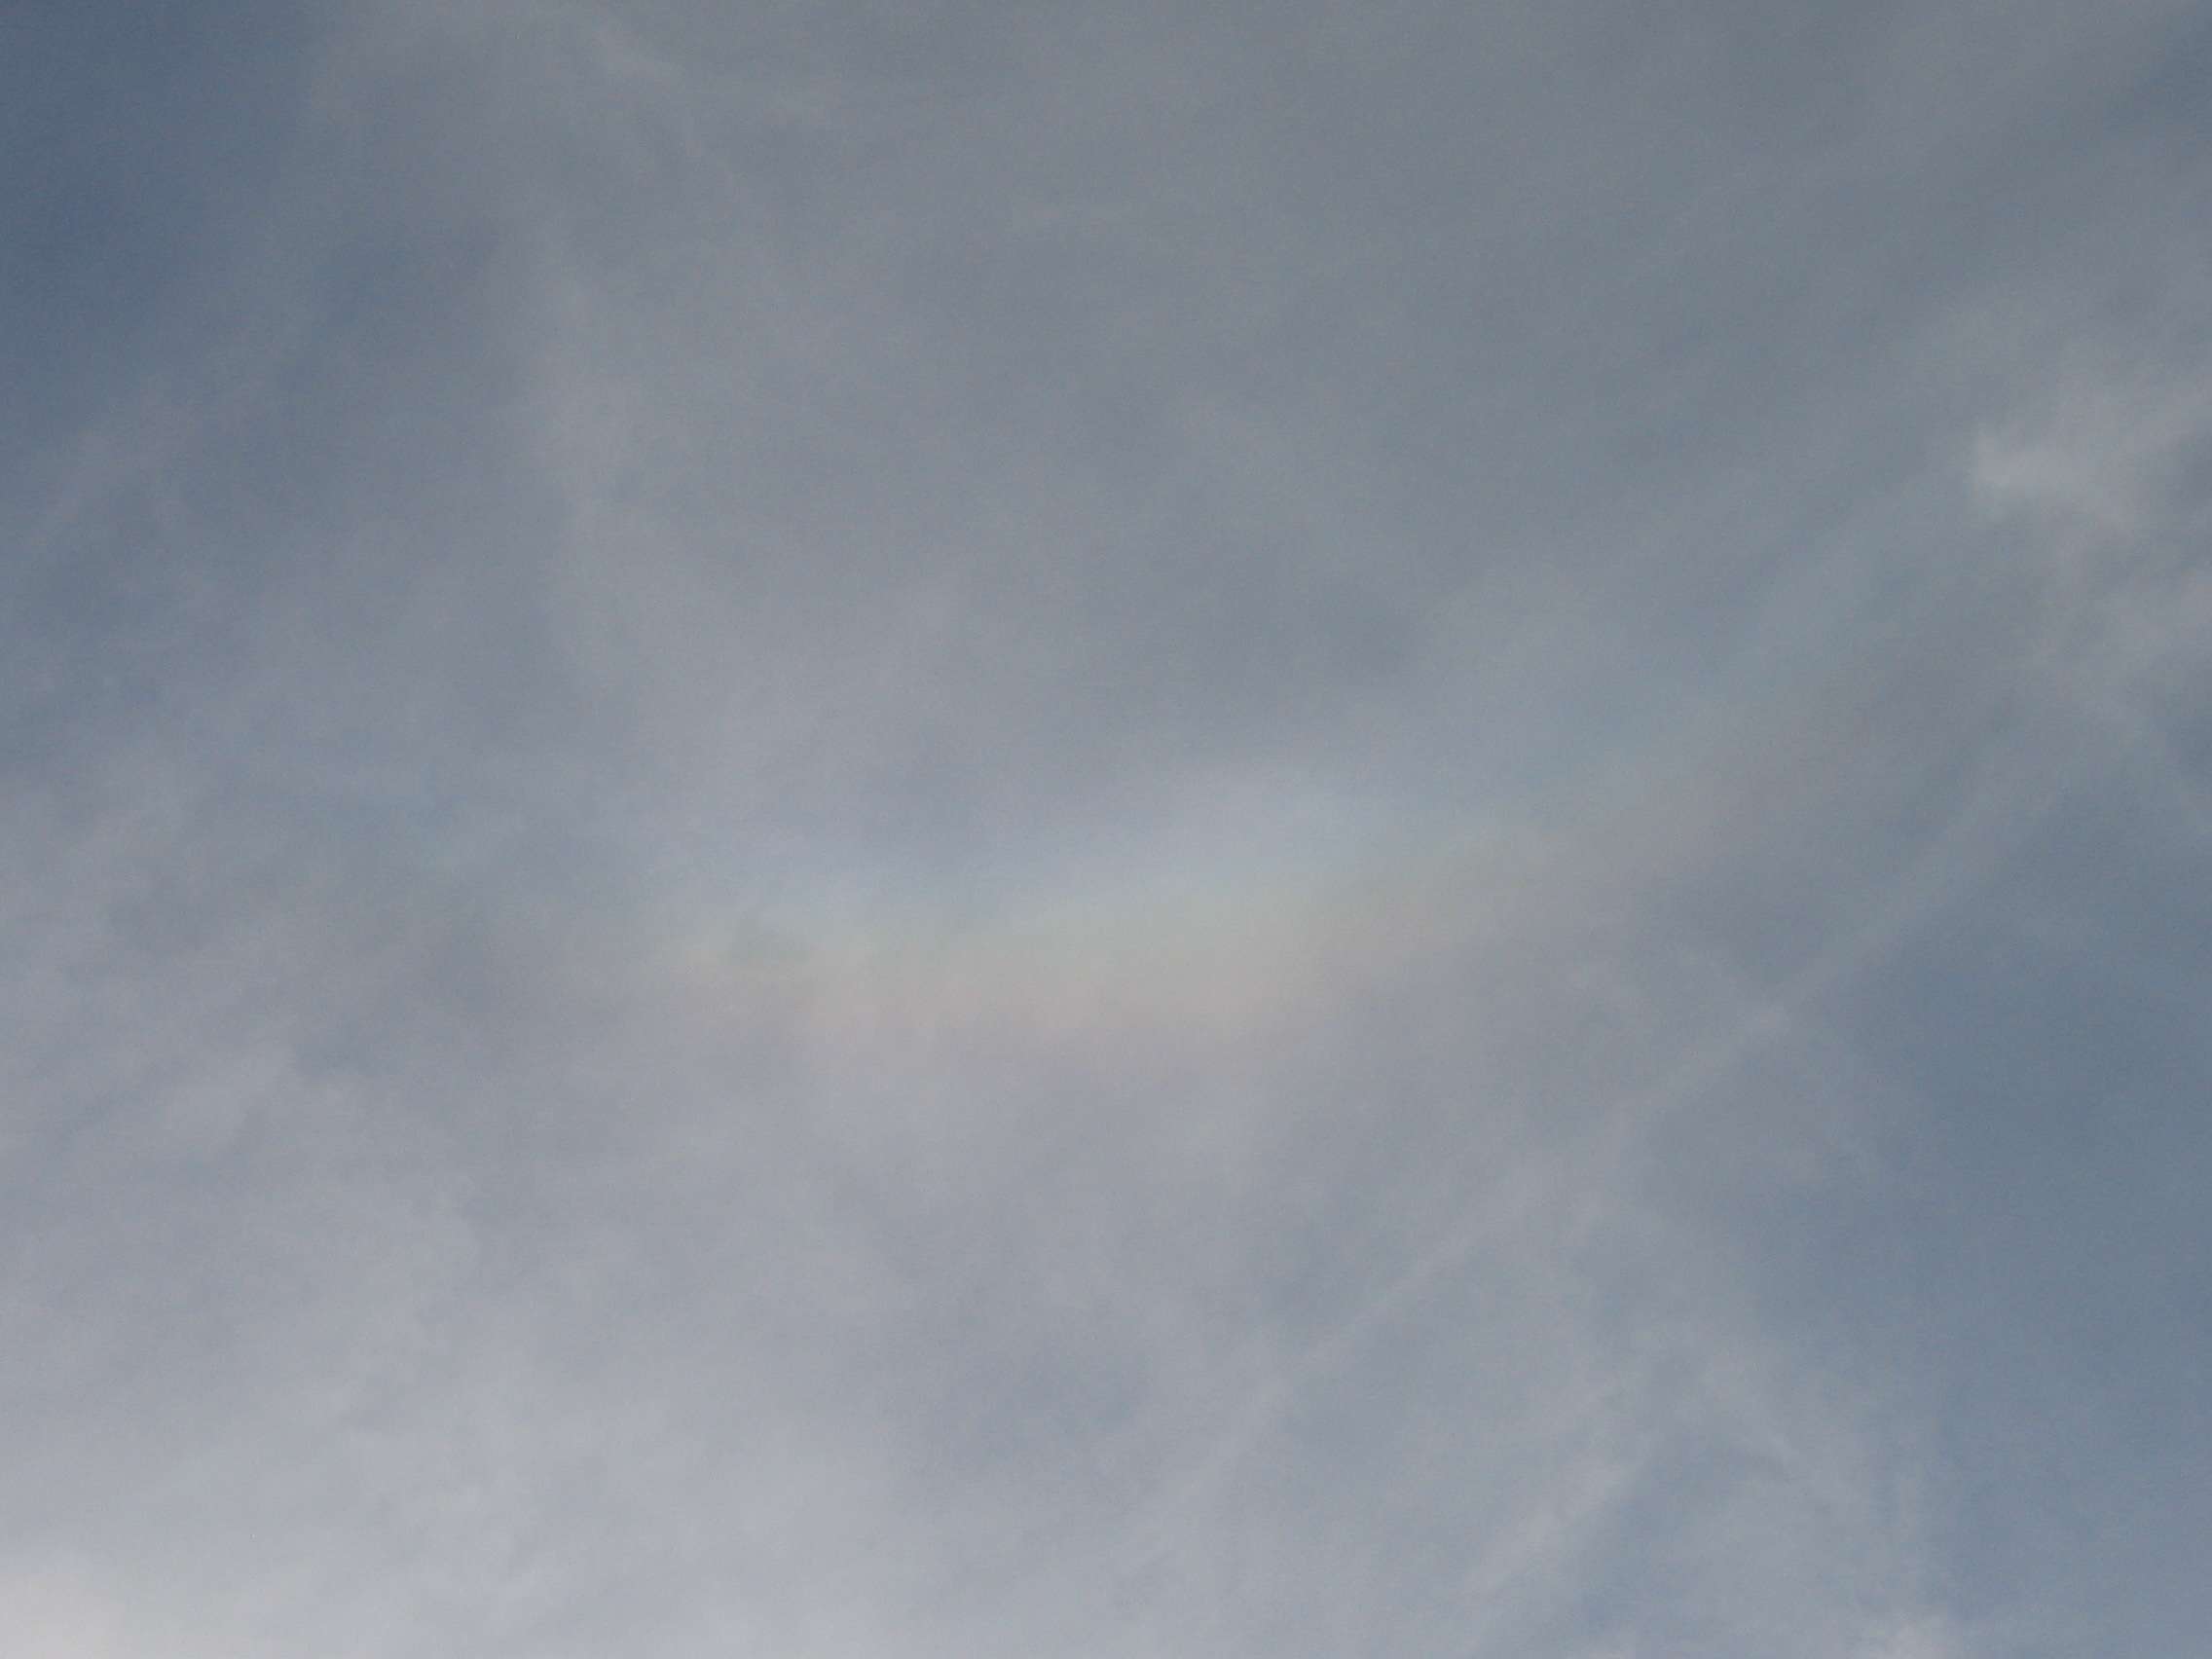 Circumzenithal arc: 94 KB; click on the image to enlarge at 2272x1704 pixels